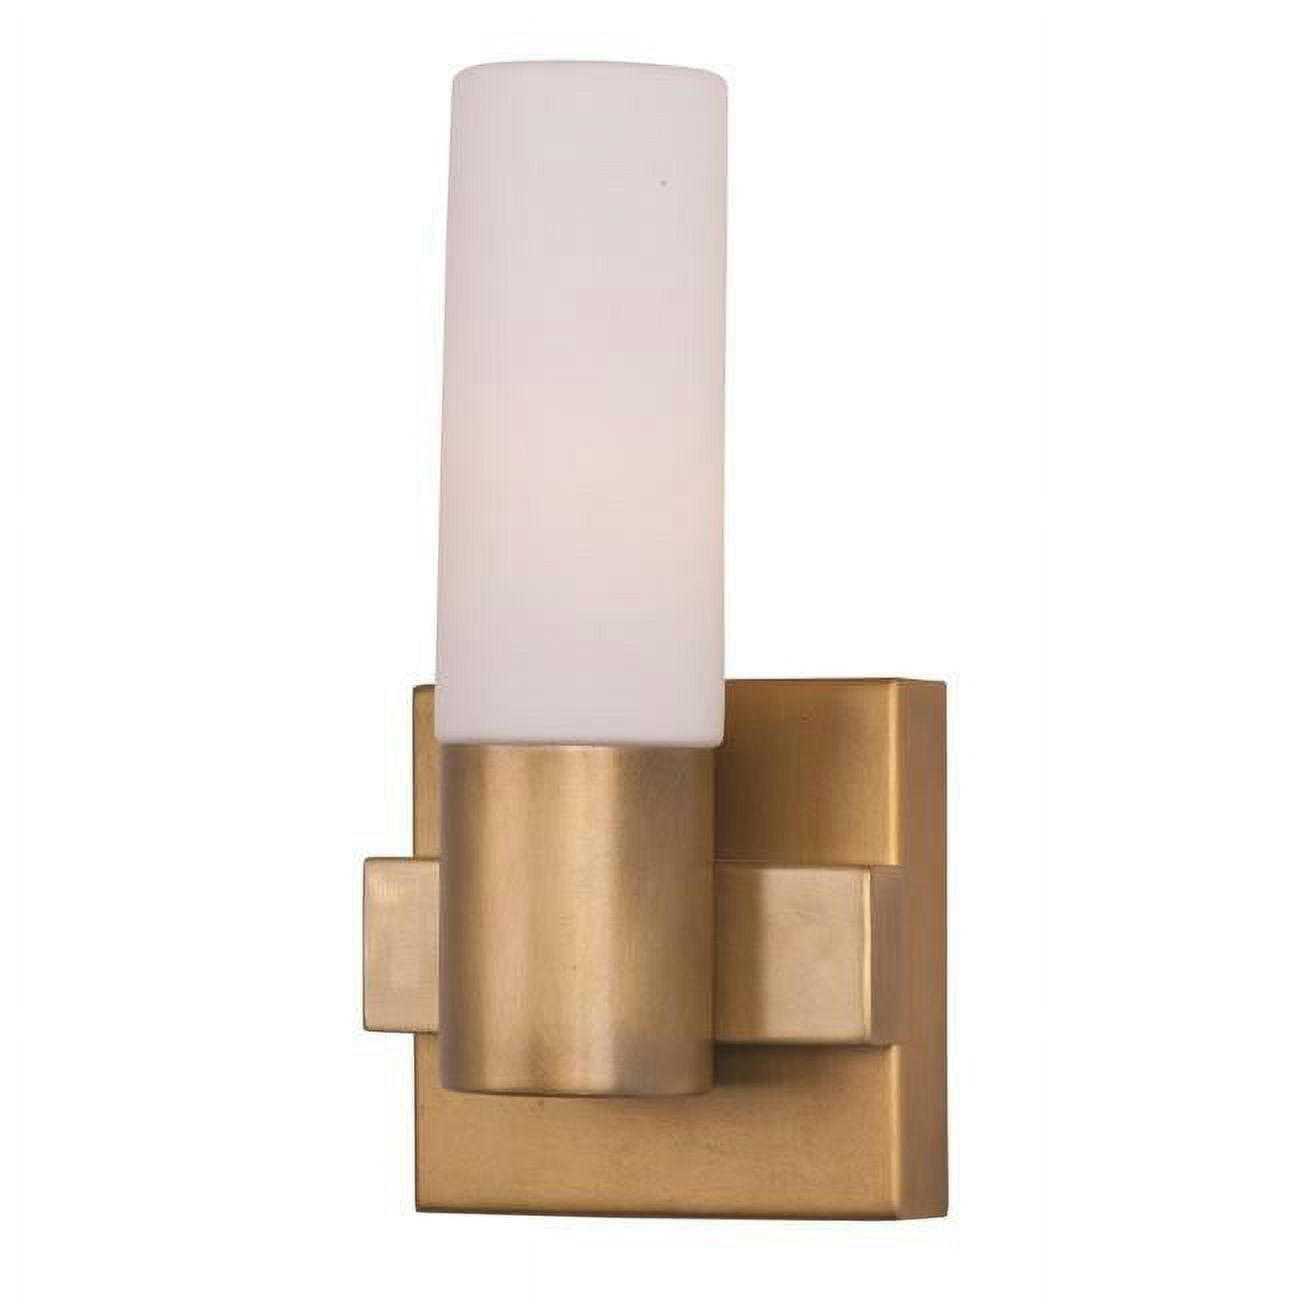 Contessa Transitional 1-Light Sconce in Natural Aged Brass with Satin White Shade